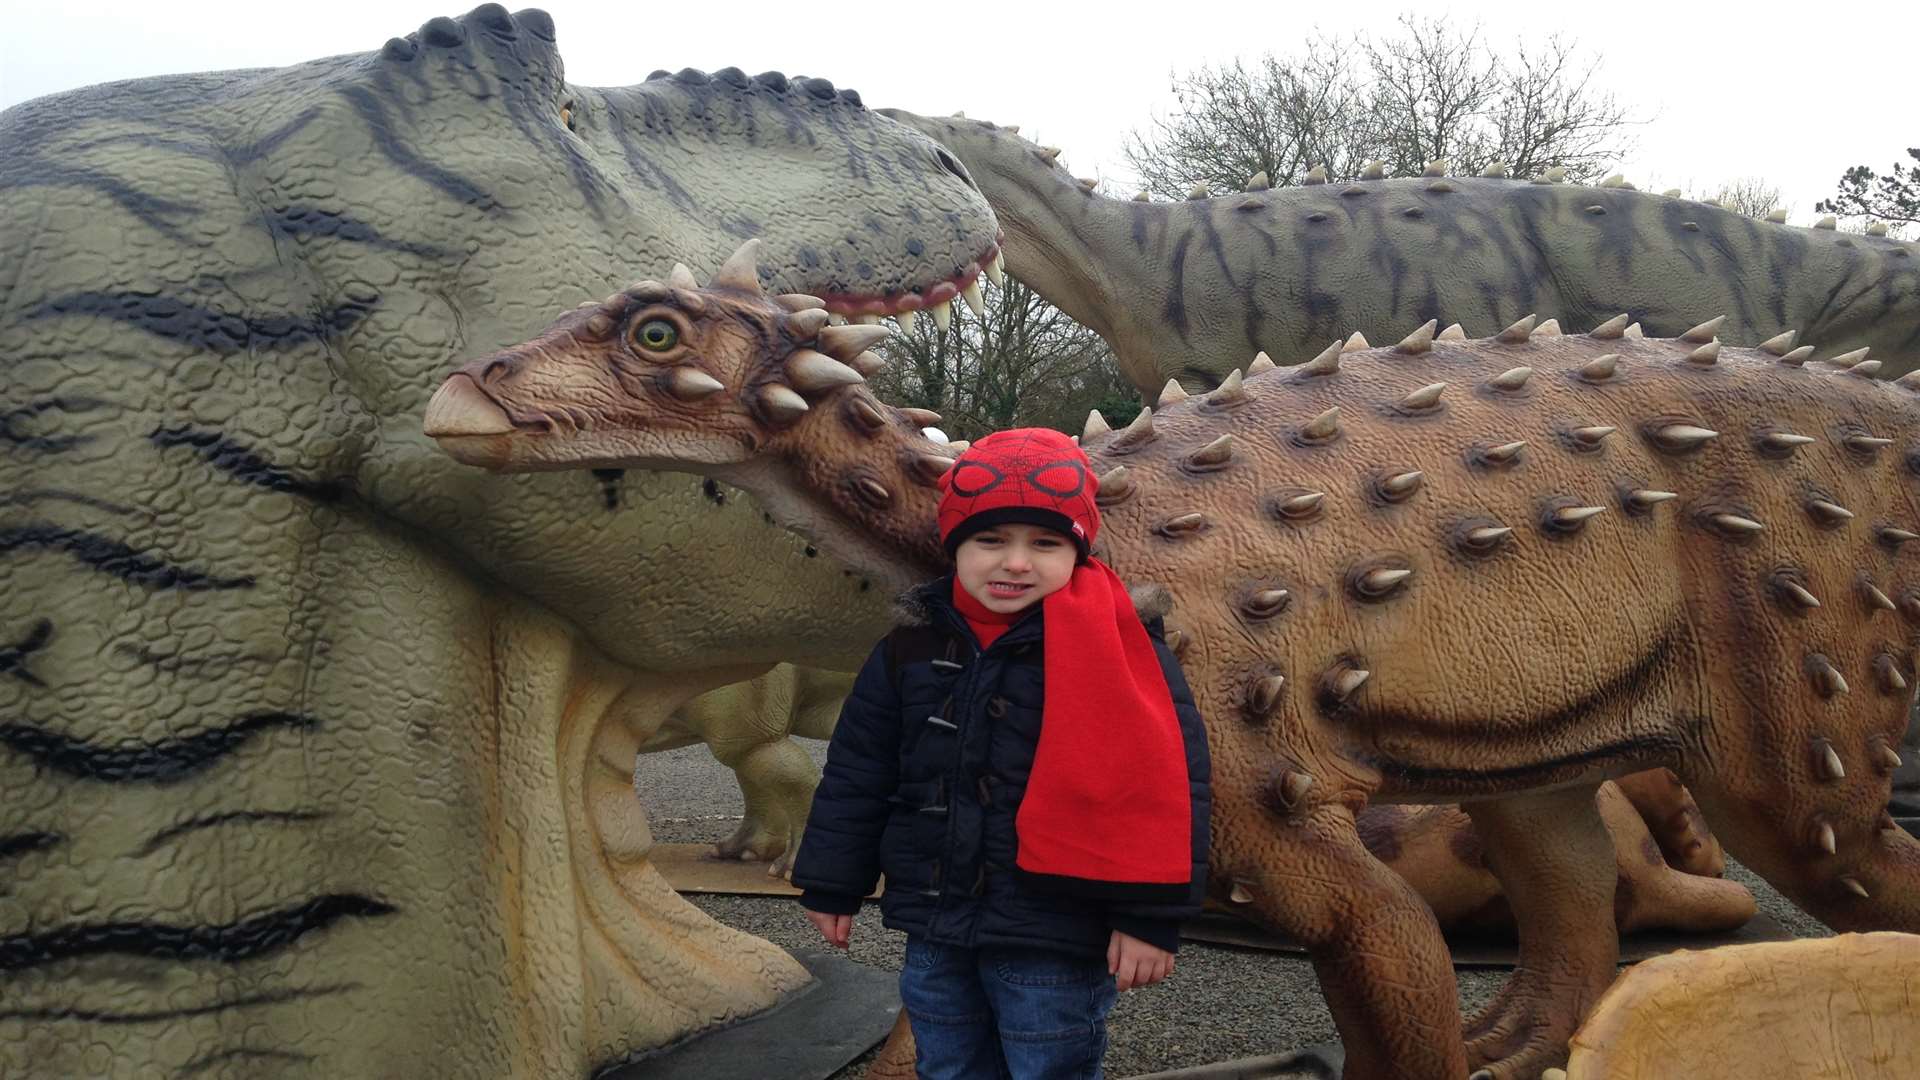 Alfie Lambert, 3, from Ashford is one of the first visitors to catch a glimpse